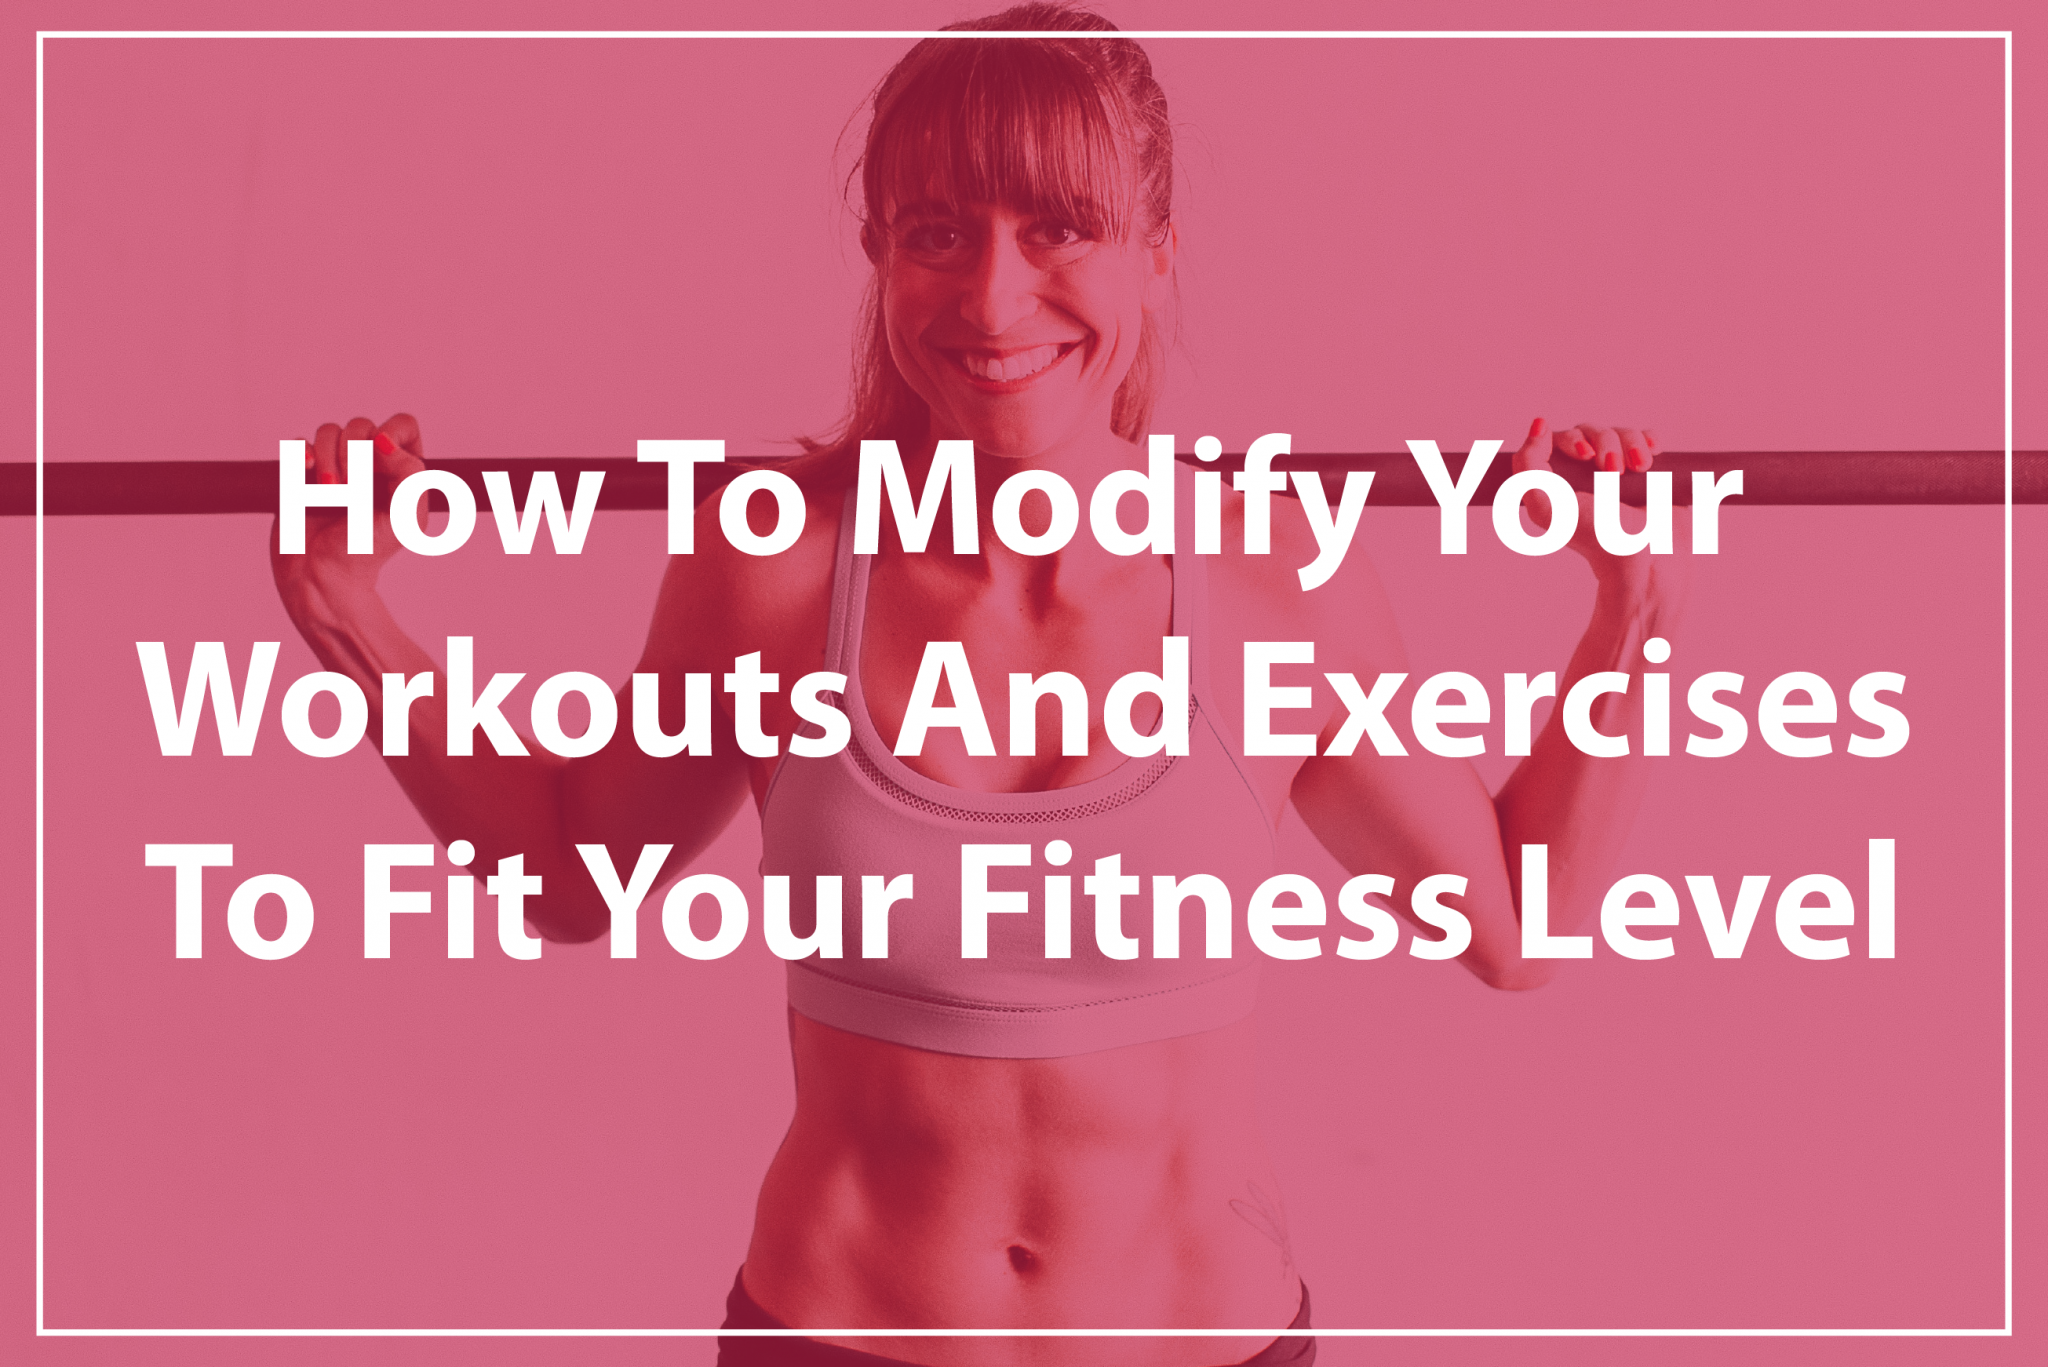 How To Modify Your Workouts And Exercises To Fit Your Fitness Level